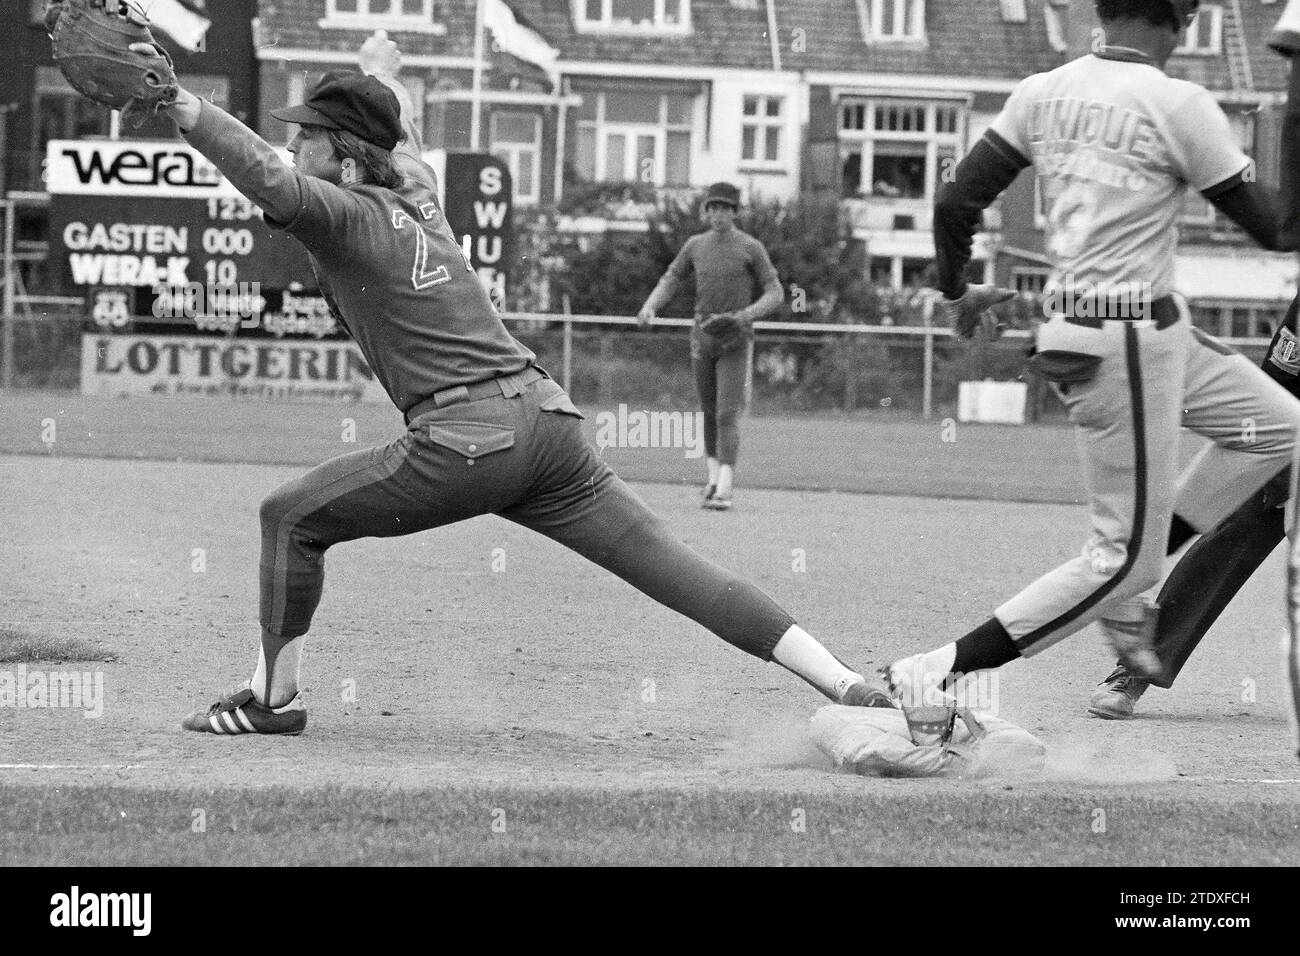 Kinheim - Giants, Baseball promotion '68 HCK Kinheim, 16-07-1978, Whizgle News from the Past, Tailored for the Future. Explore historical narratives, Dutch The Netherlands agency image with a modern perspective, bridging the gap between yesterday's events and tomorrow's insights. A timeless journey shaping the stories that shape our future. Stock Photo